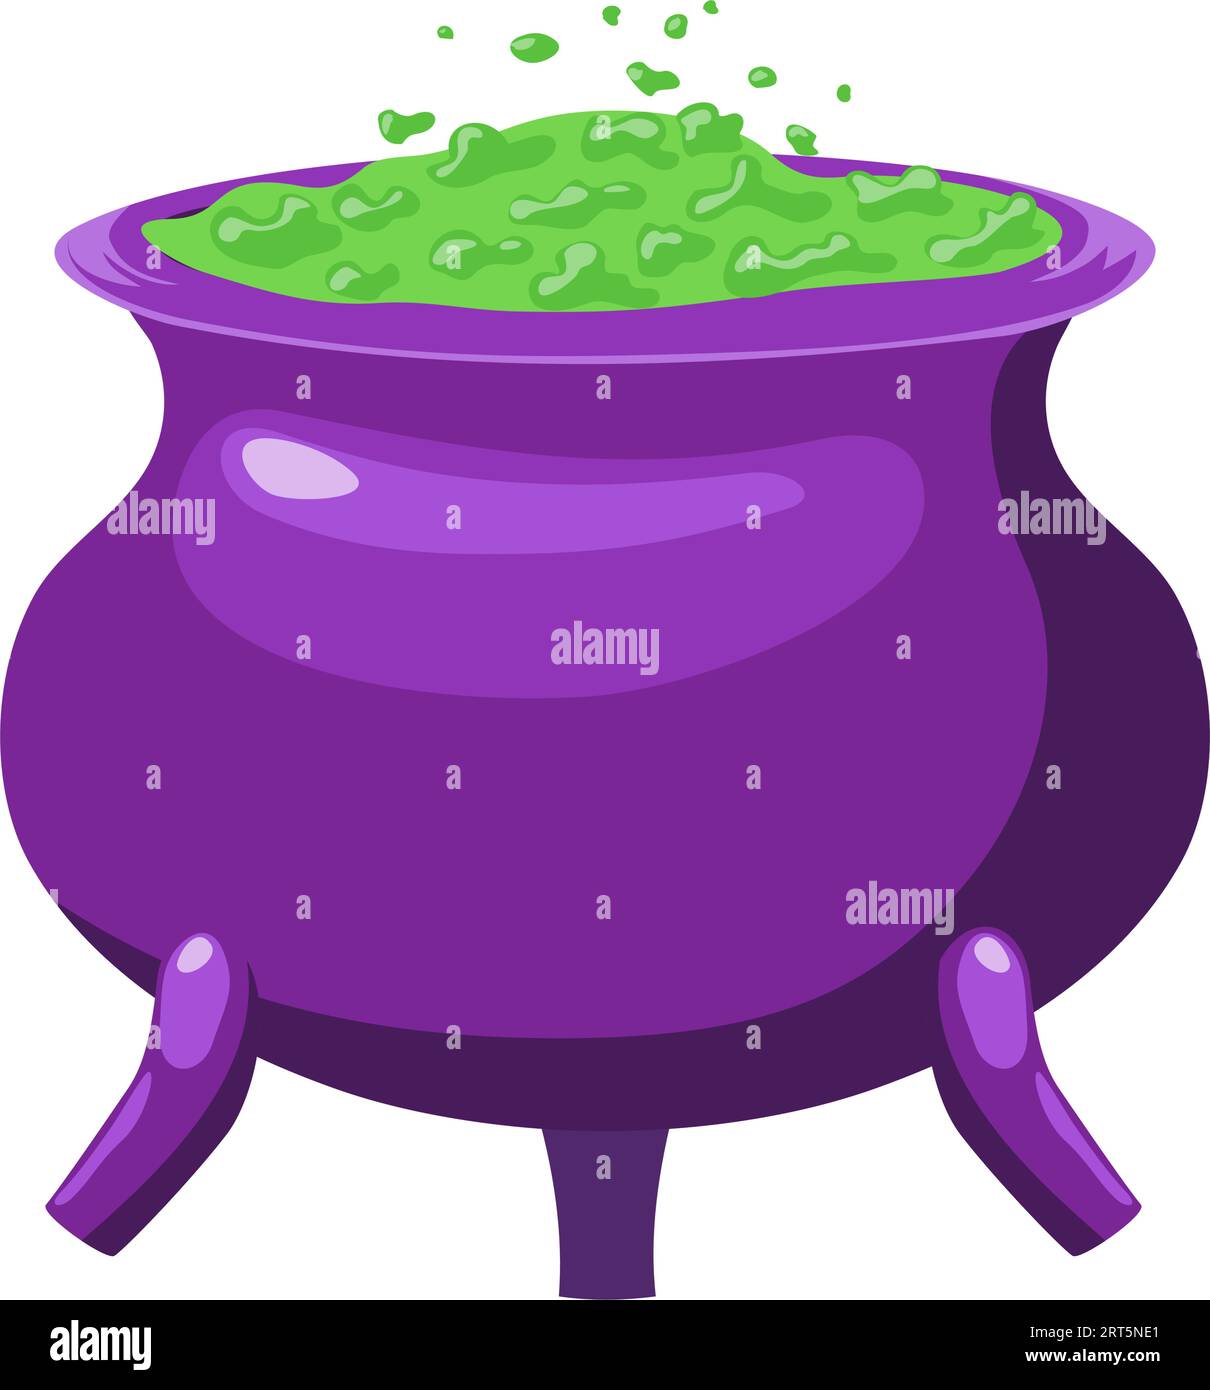 A purple cauldron with green liquid in it. Halloween design element. Isolated witch pot graphic template. Vector illustration. Stock Vector